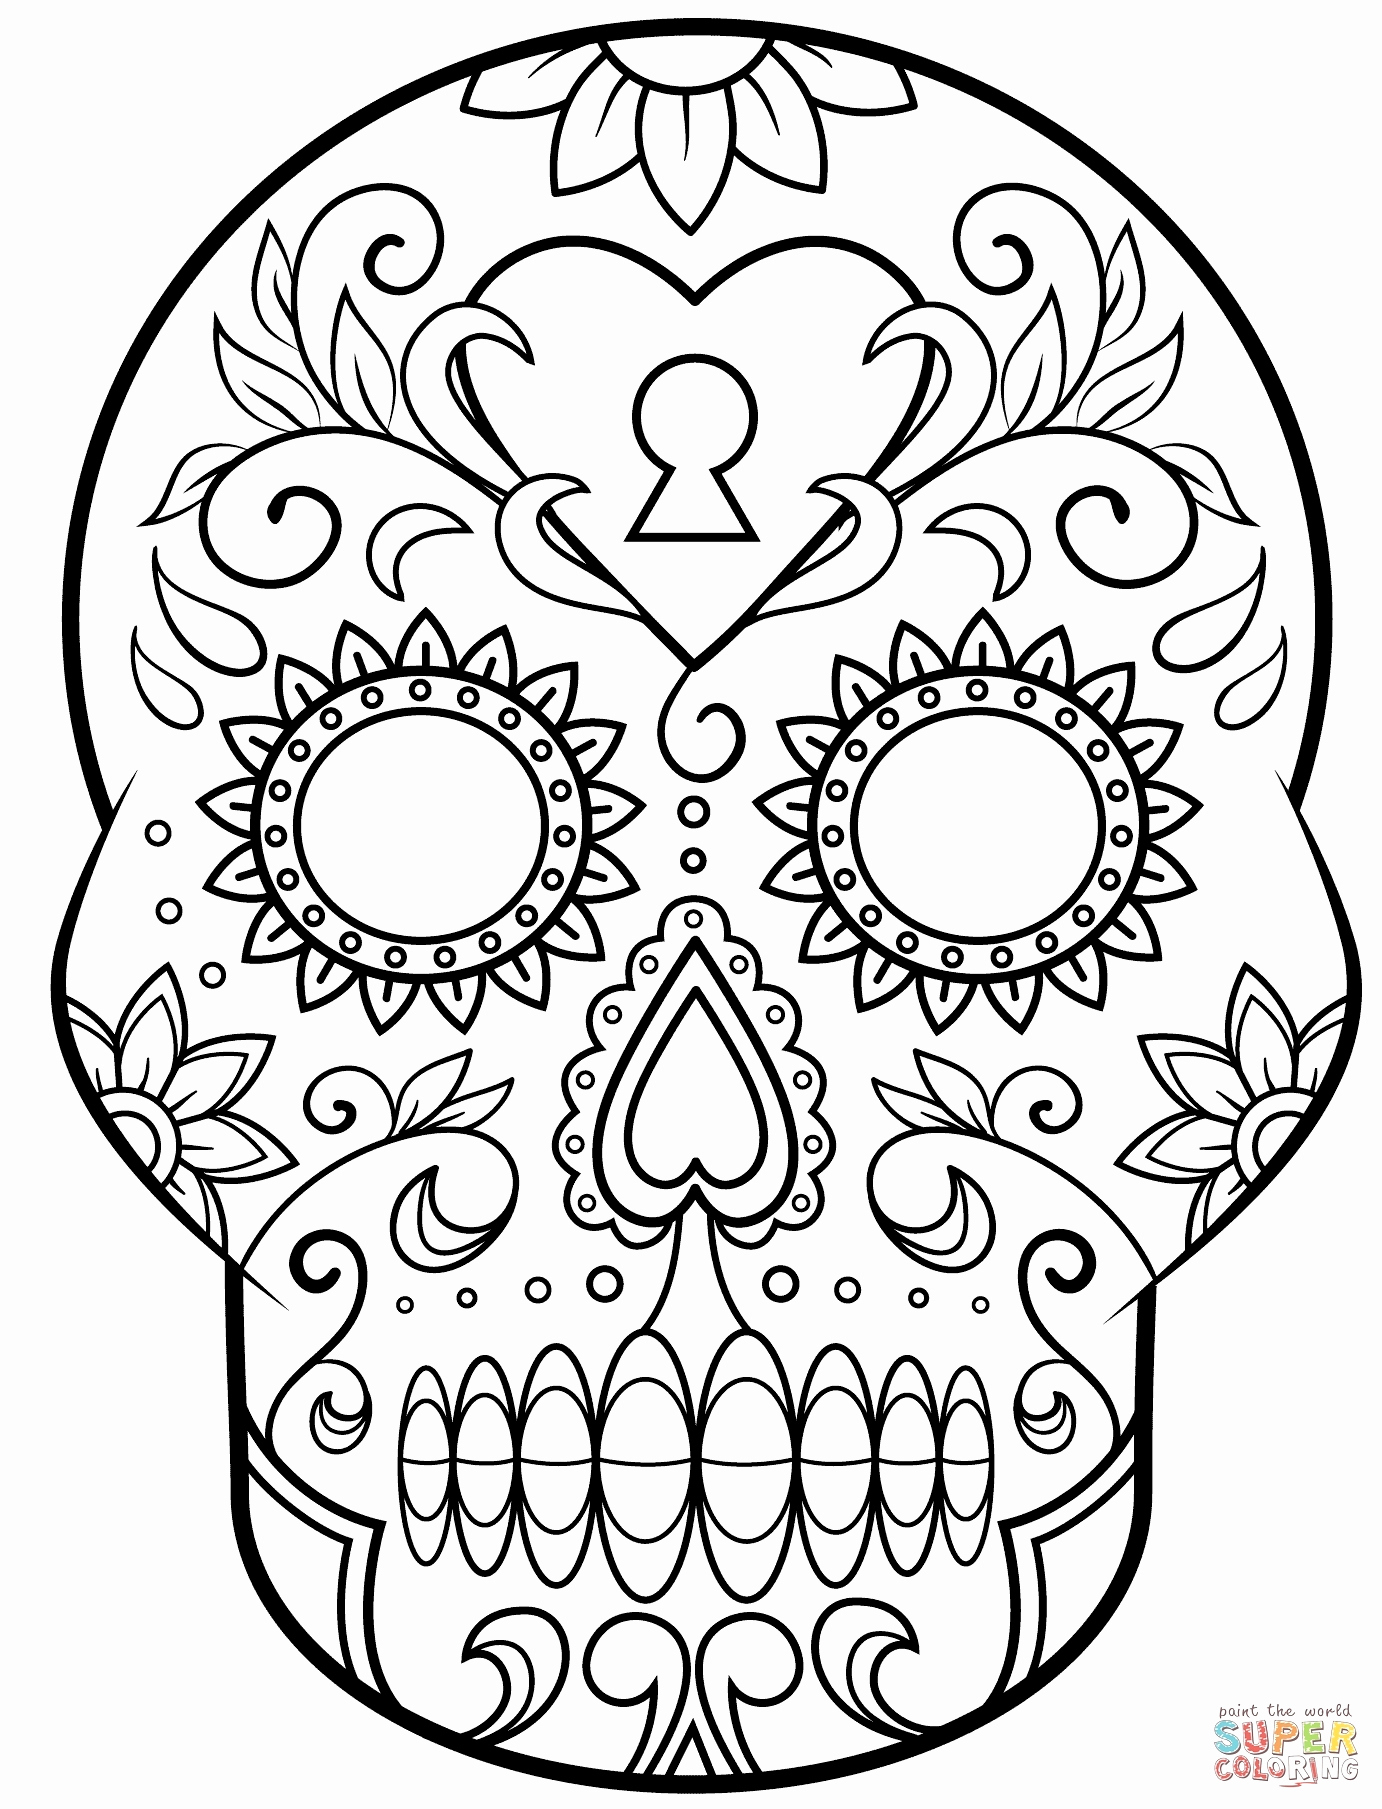 Halloween Coloring Pages Skeleton | Free Coloring Pages - Free Printable Skeleton Coloring Pages